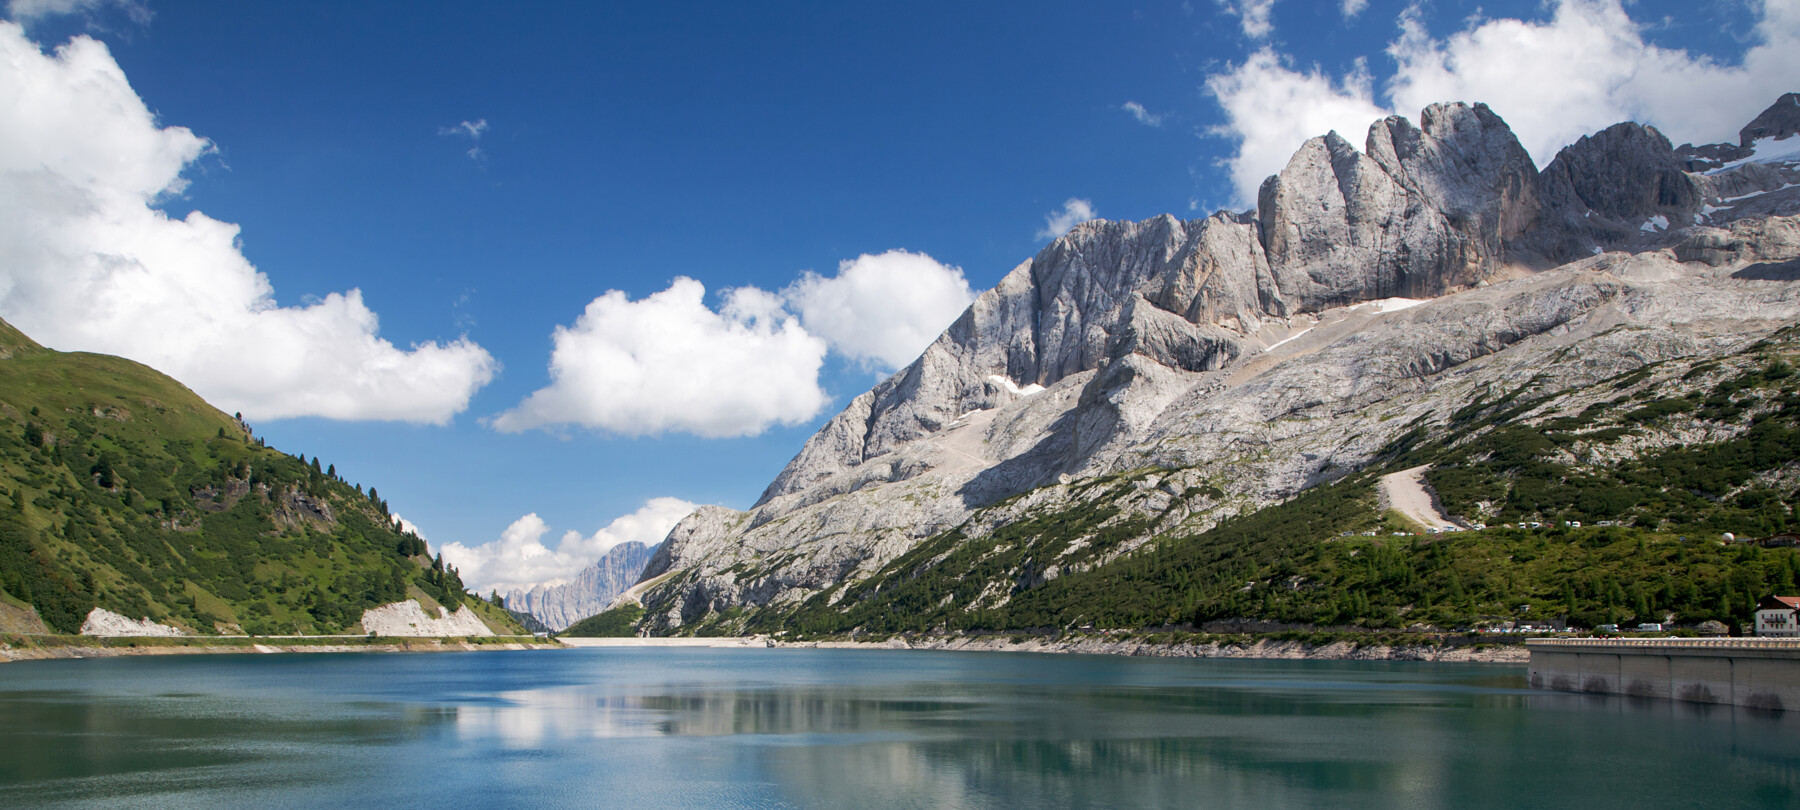 The Dolomites, a precious site for science and nature: the laboratory on Passo Fedaia